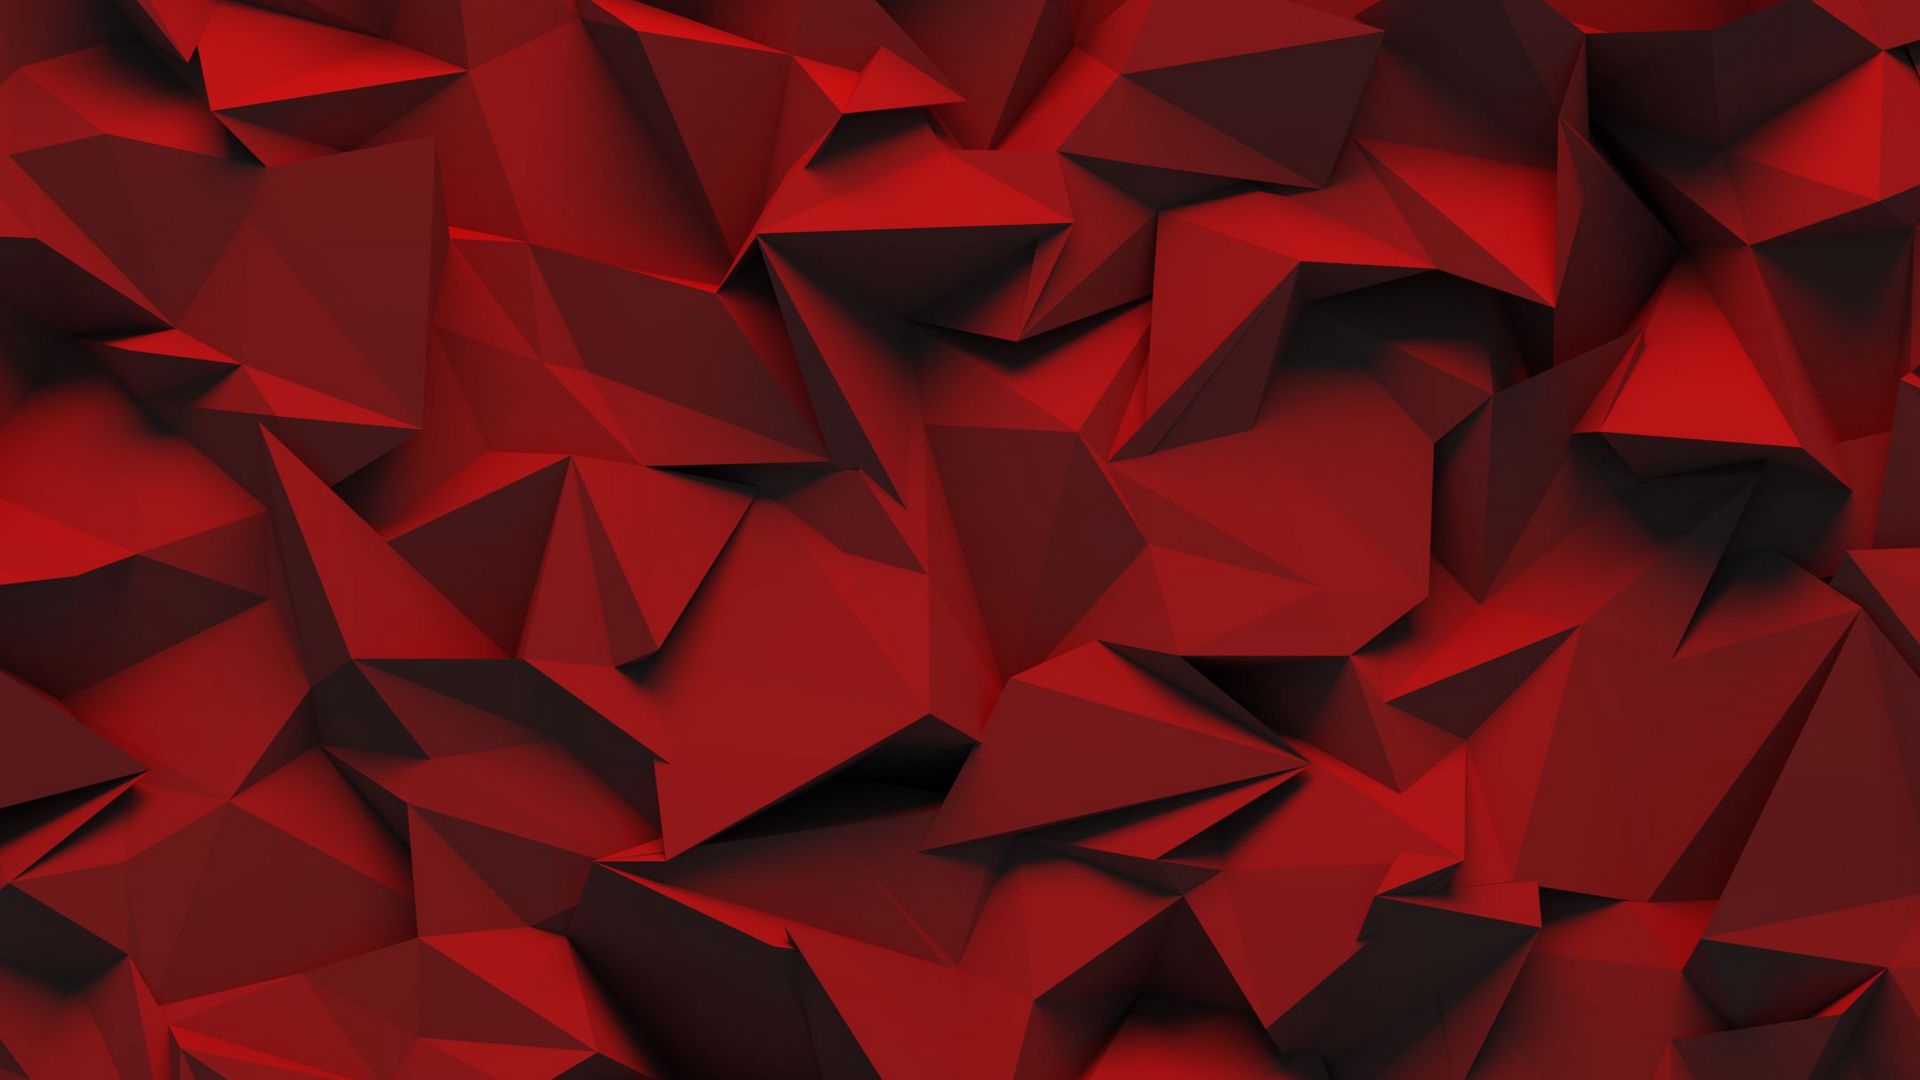 Download wallpaper 1920x1080 relief, red, texture, triangle full hd, hdtv,  fhd, 1080p hd background